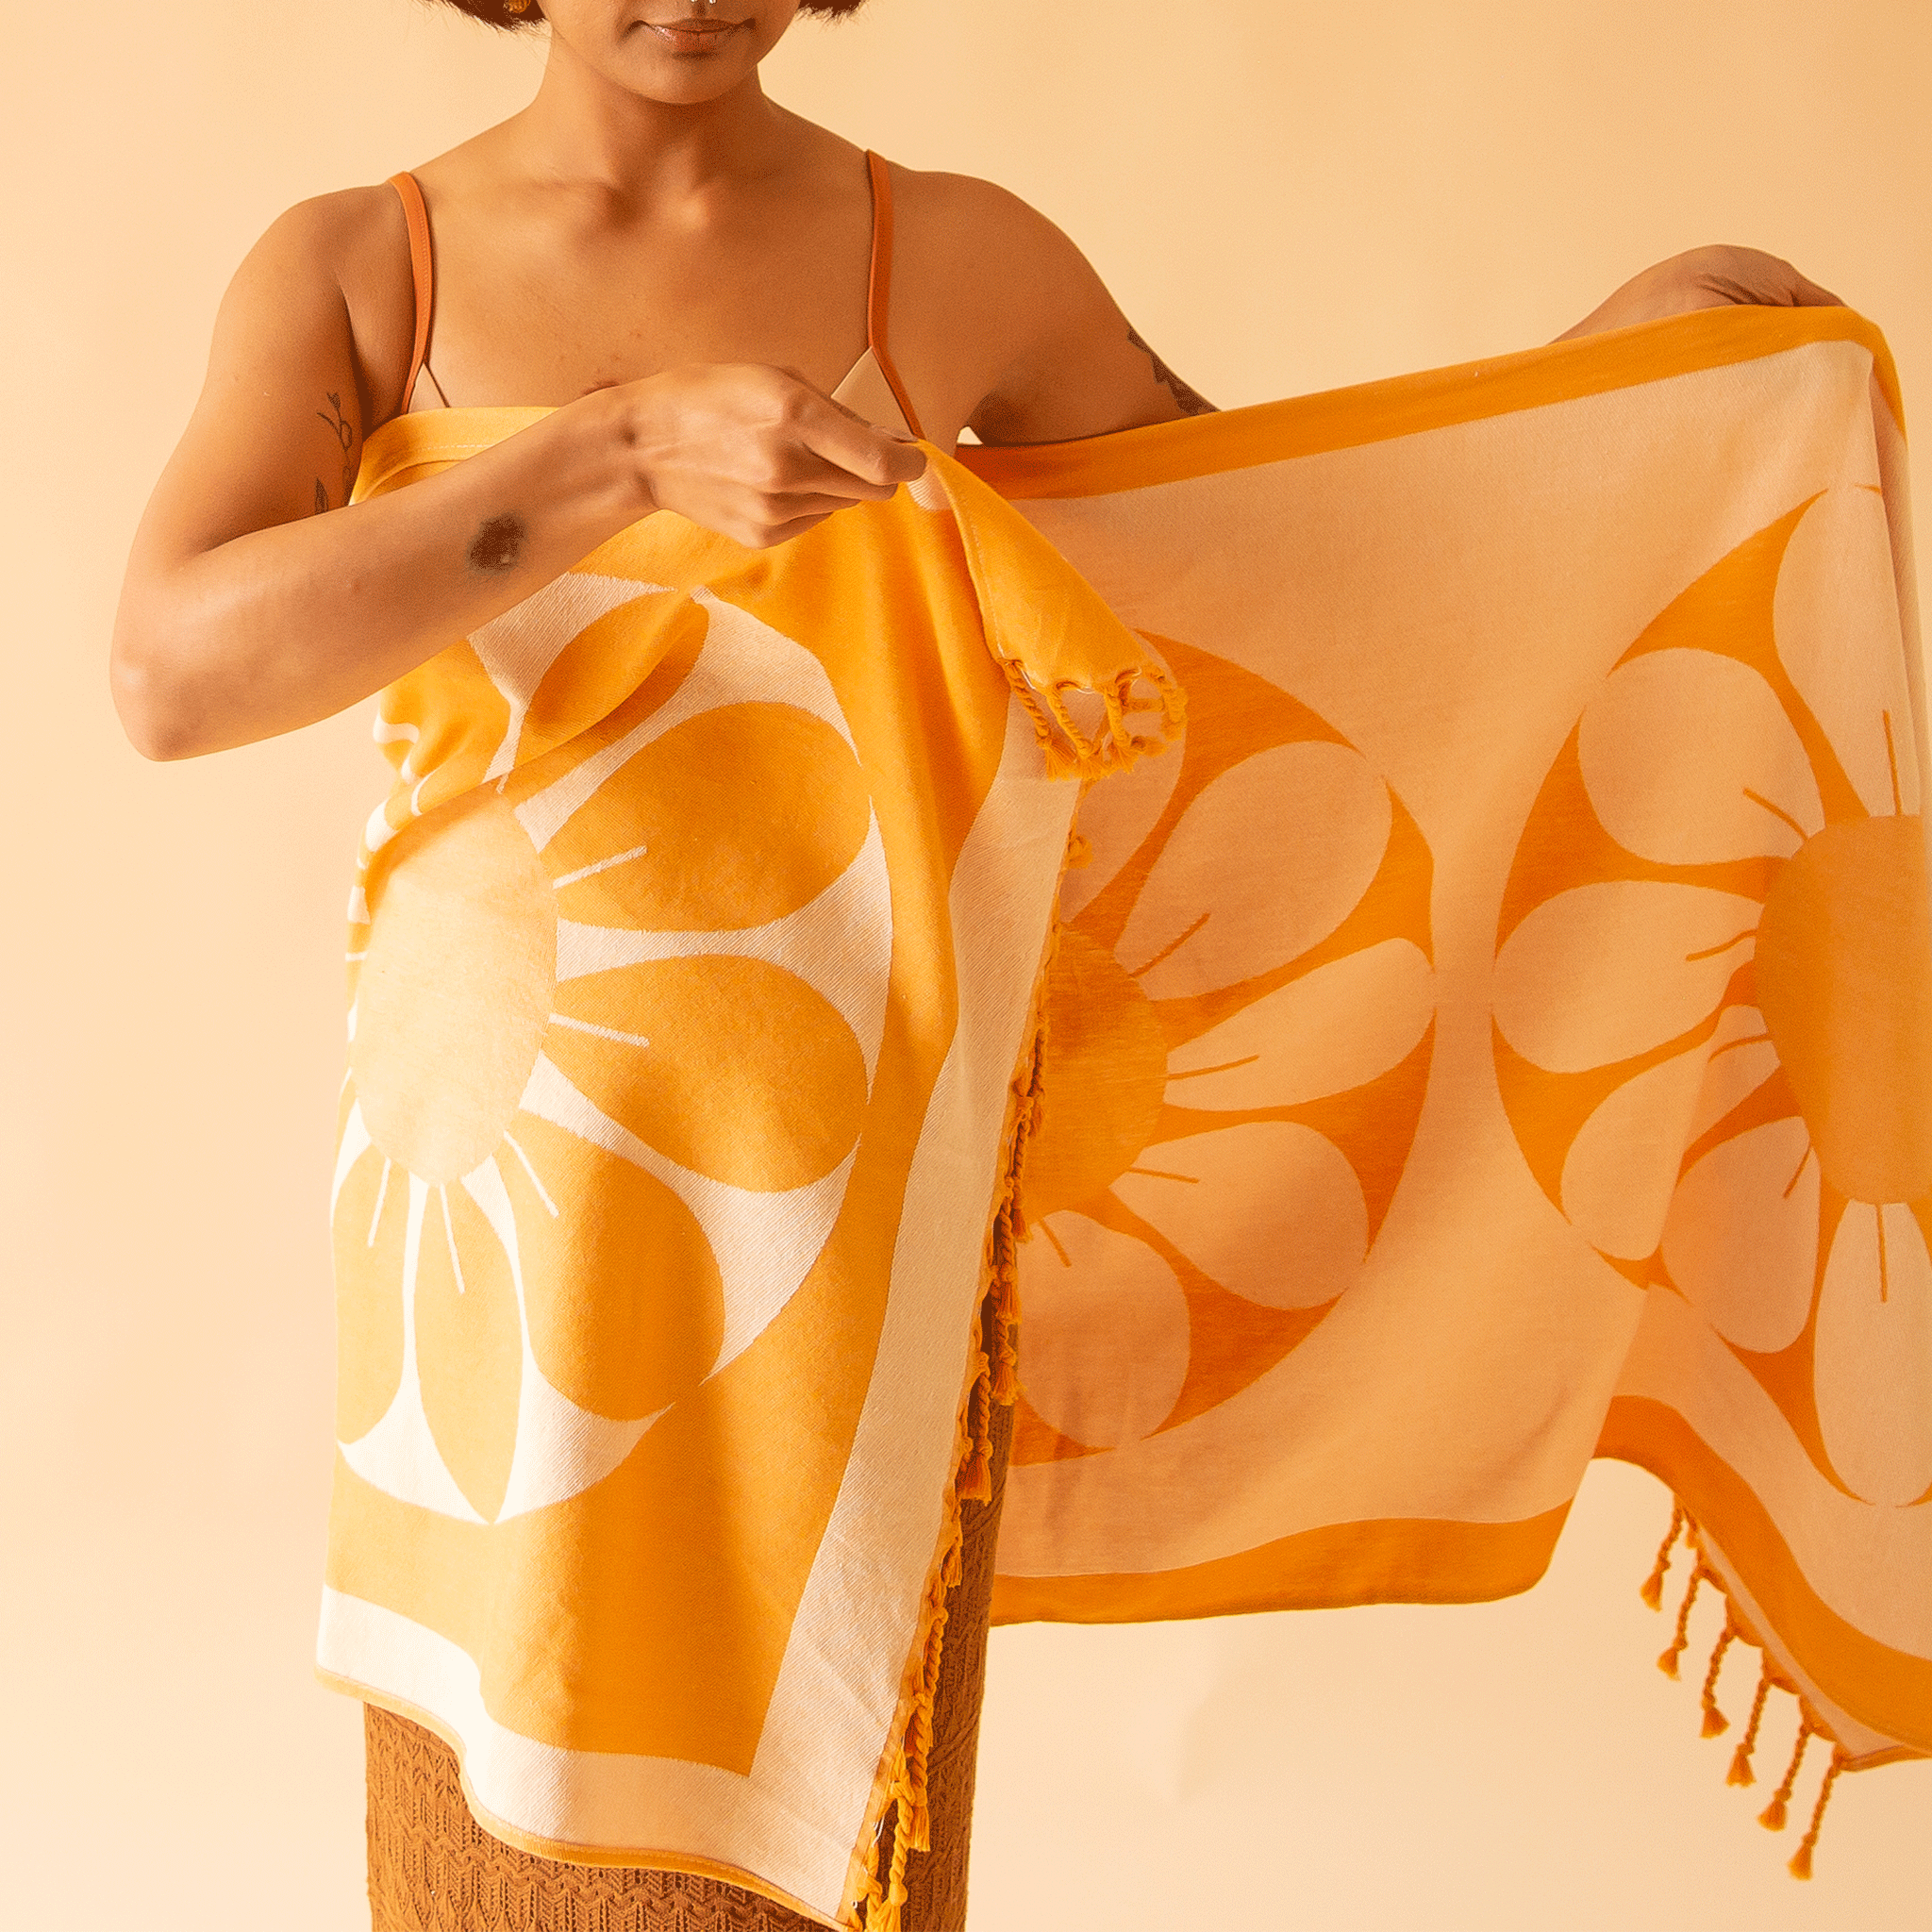 A model with the orange Retro Flower Beach Towel wrapped around their body. The towel has two large flower designs and orange tassels at both ends.